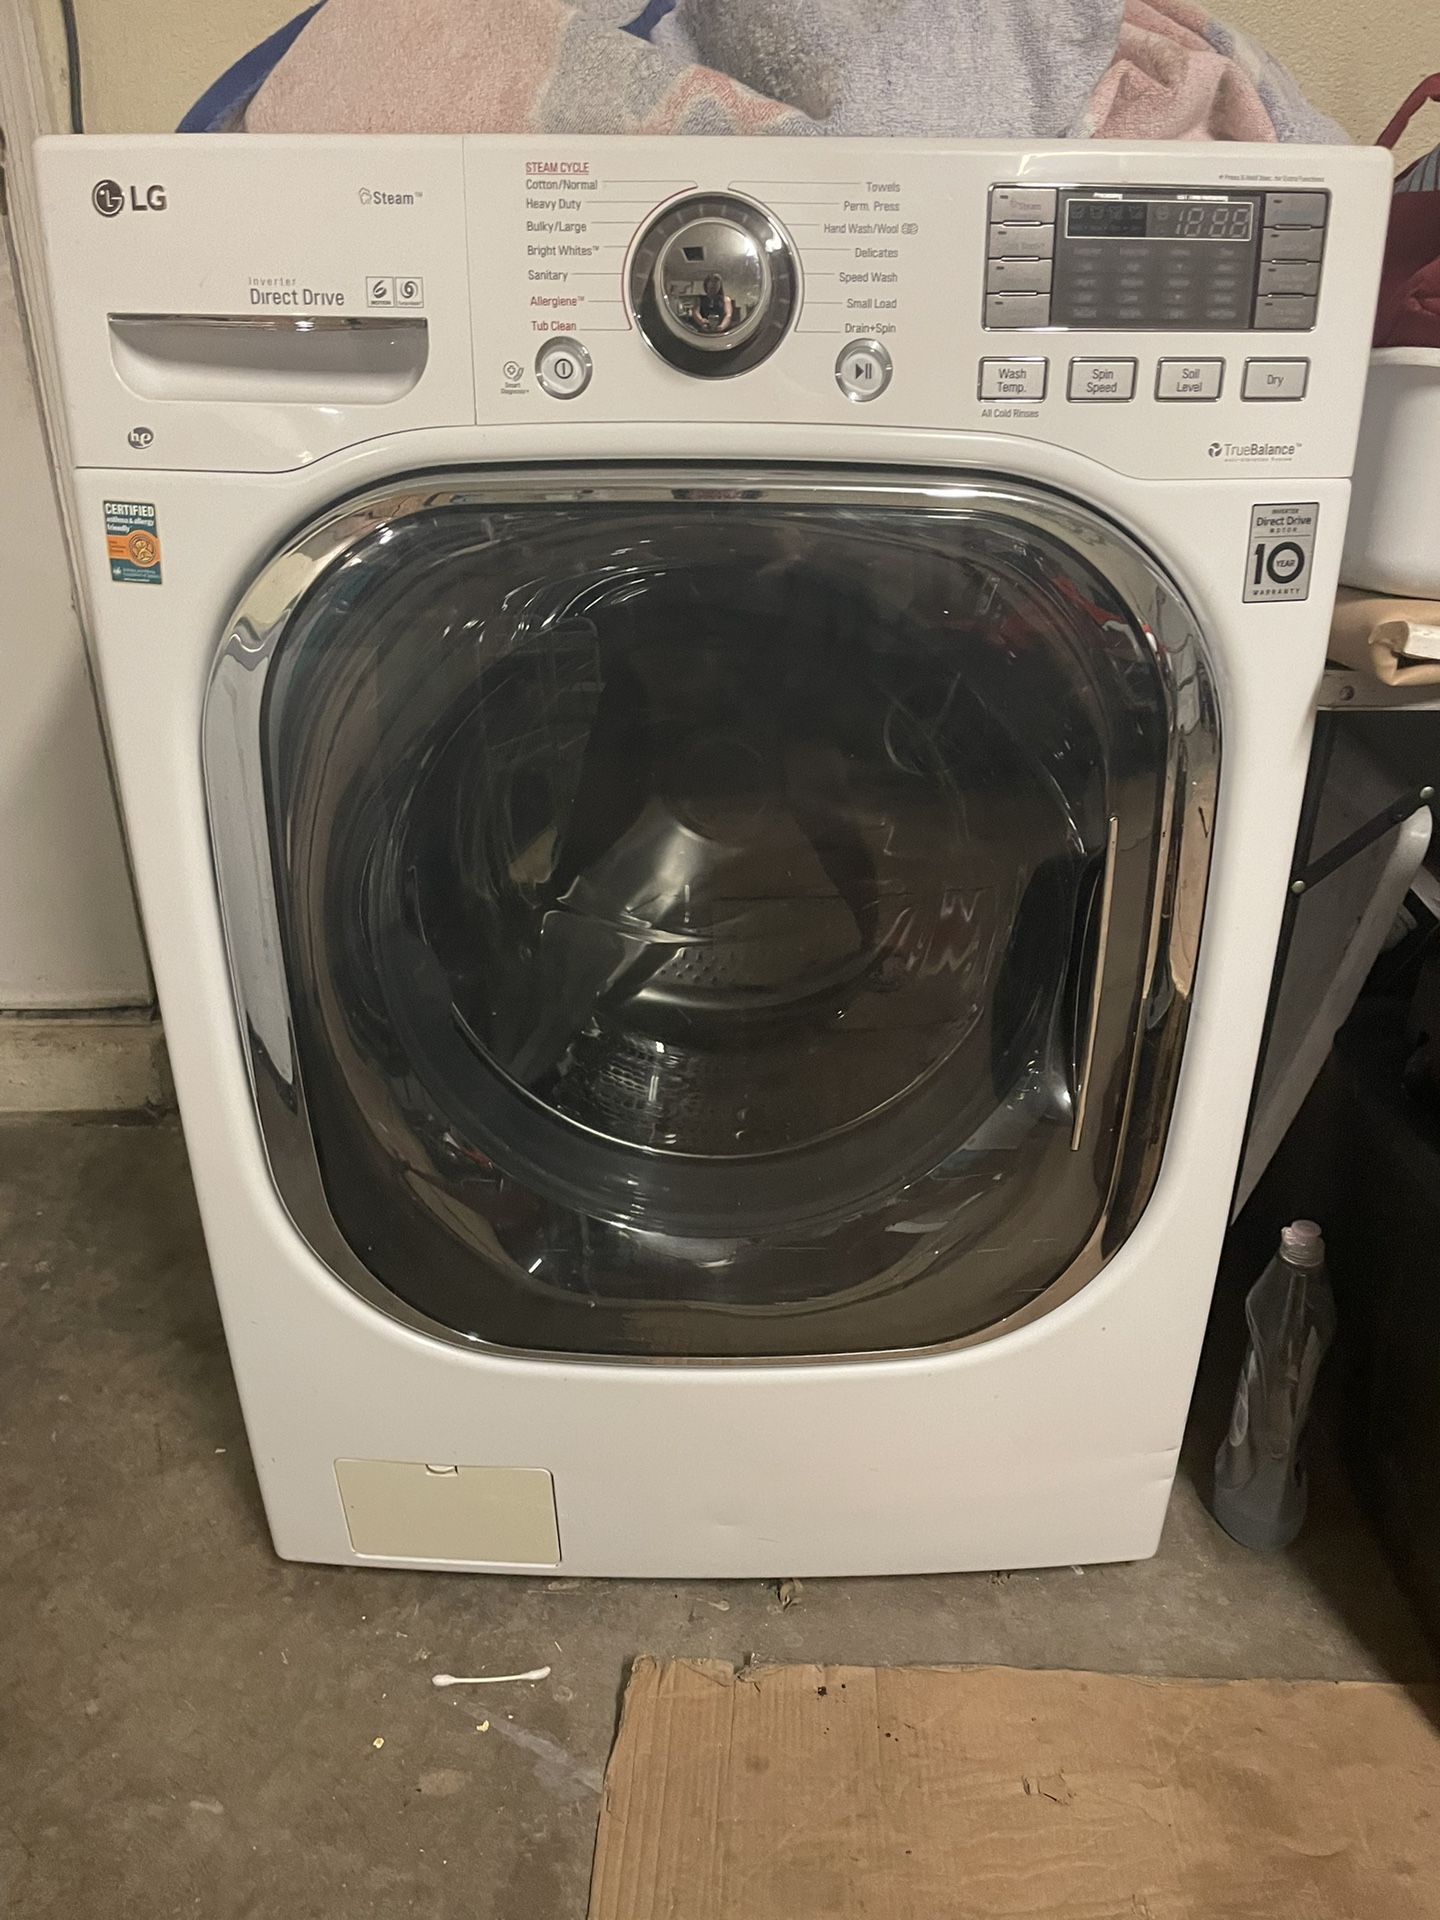 Washer /Dryer  Combo 